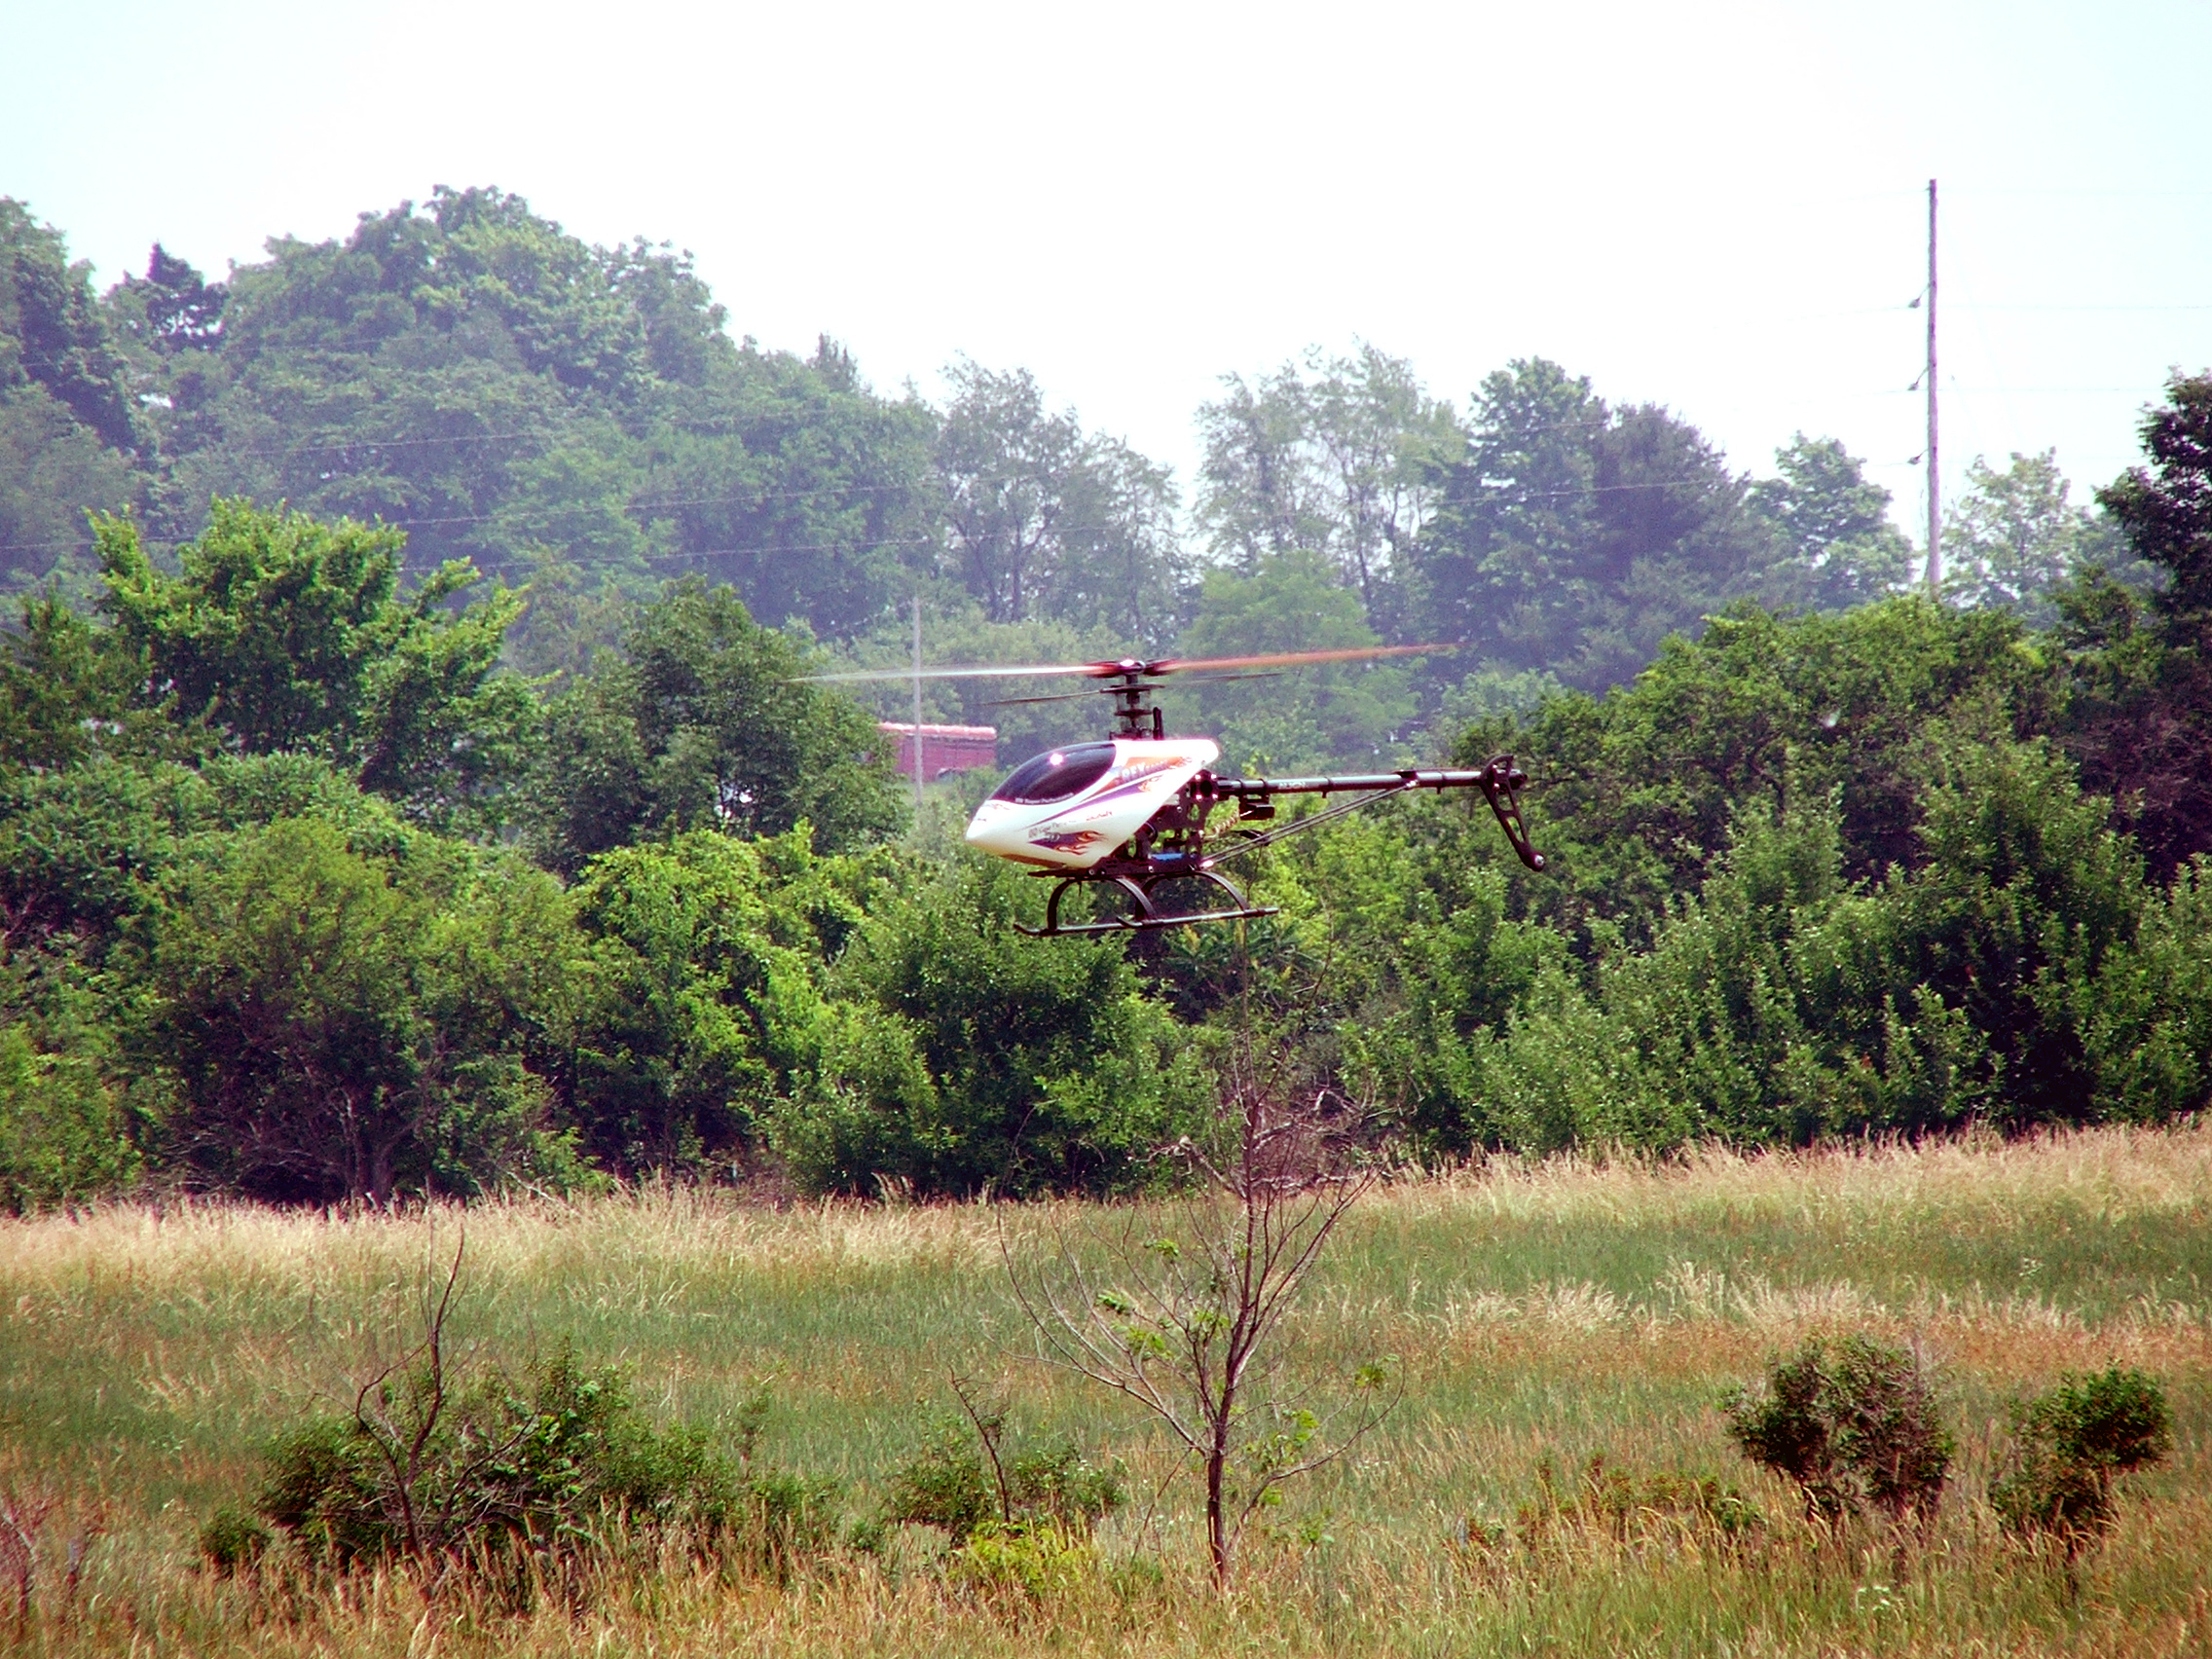 rc helicopter in flight, Aerial, Hobby, Take, Sky, HQ Photo